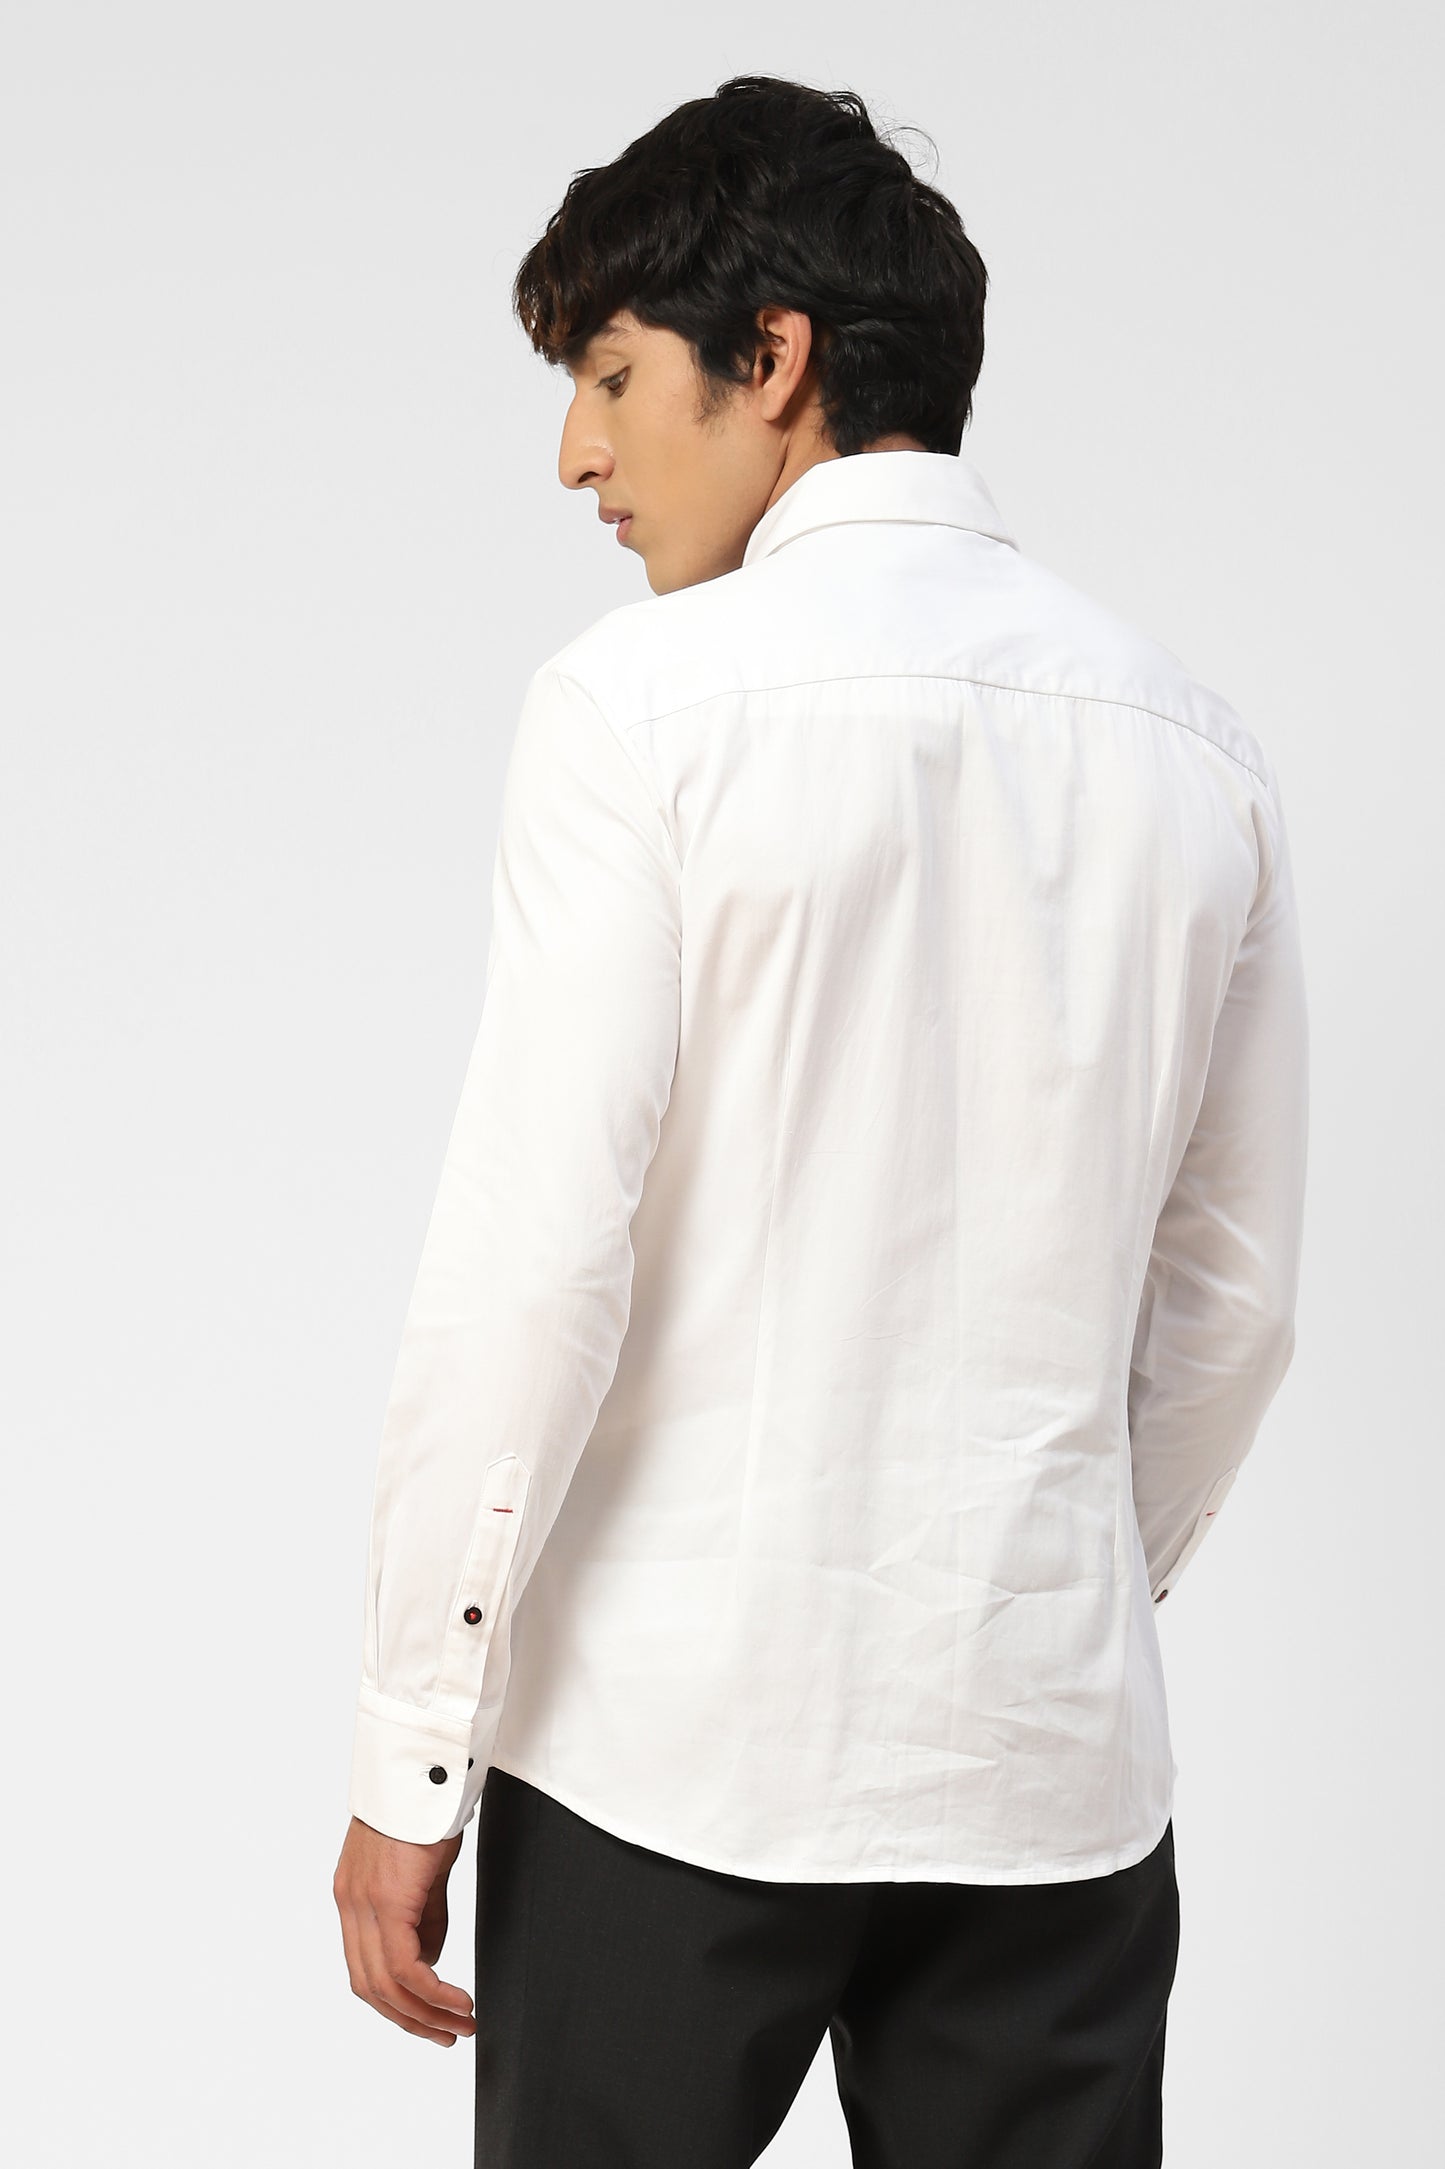 Mens Festive Cotton Satin Shirt With Equestrian Beaded Embroidery